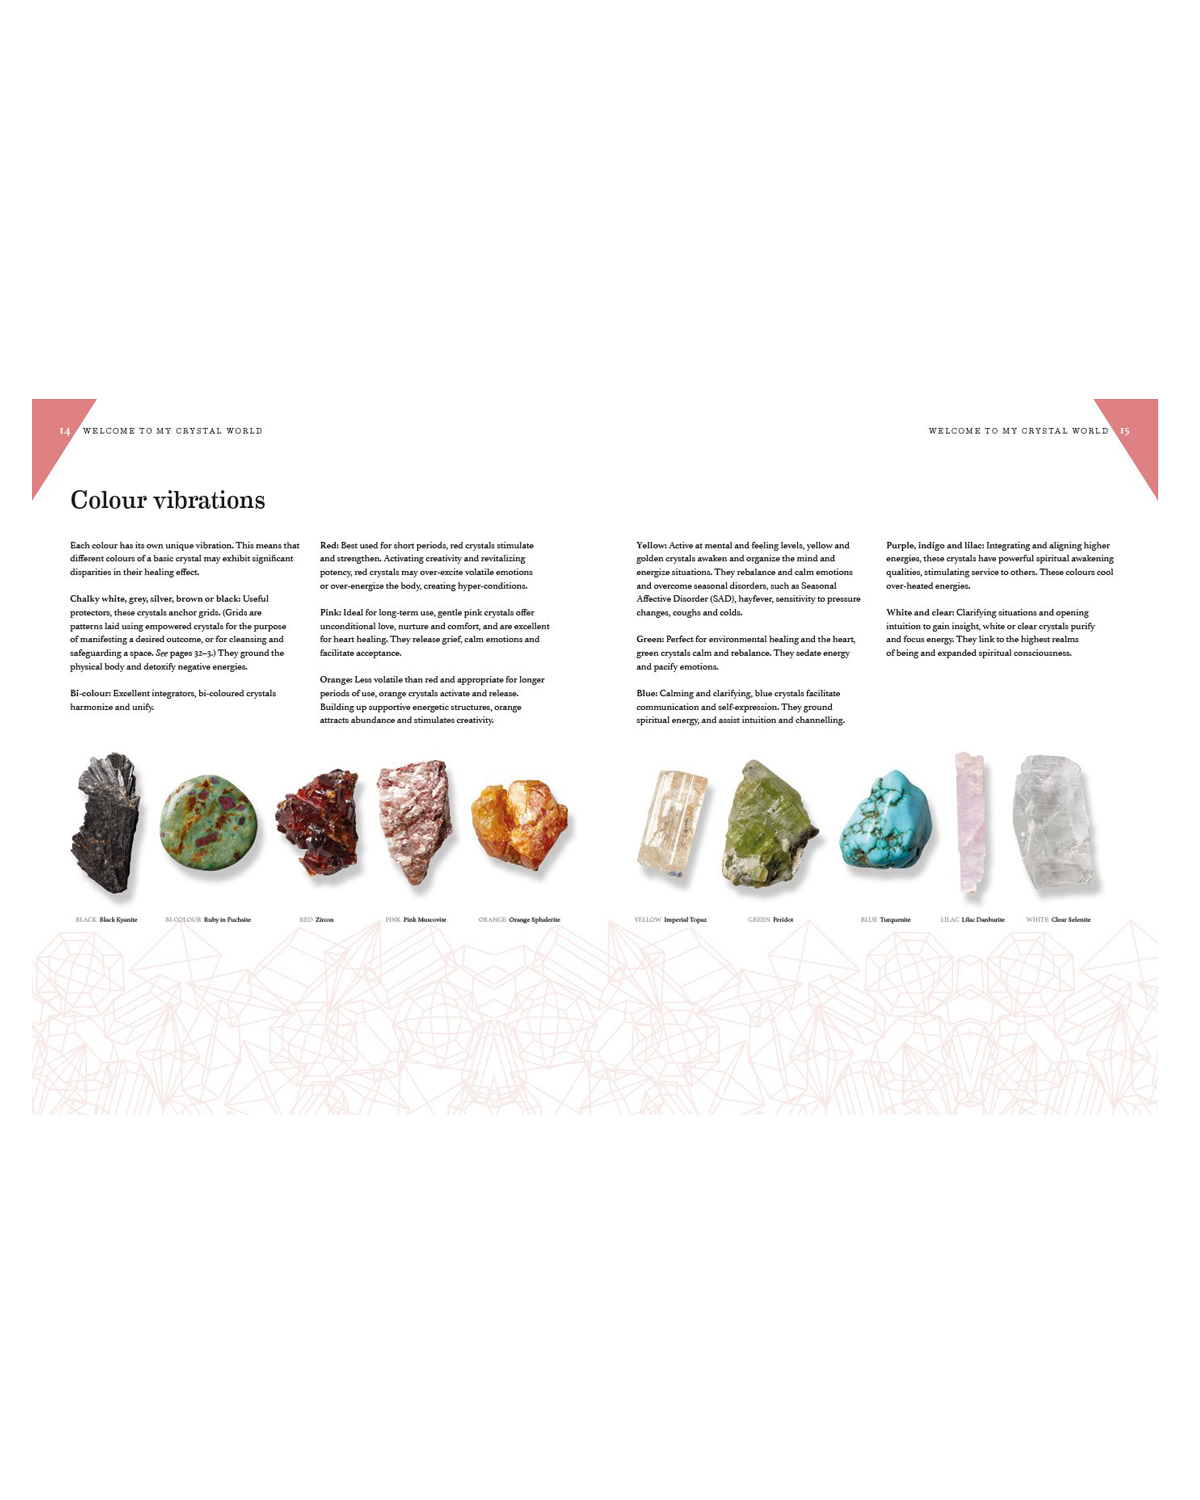 Crystal Companion Enhance Your Life With Crystals House Of Formlab